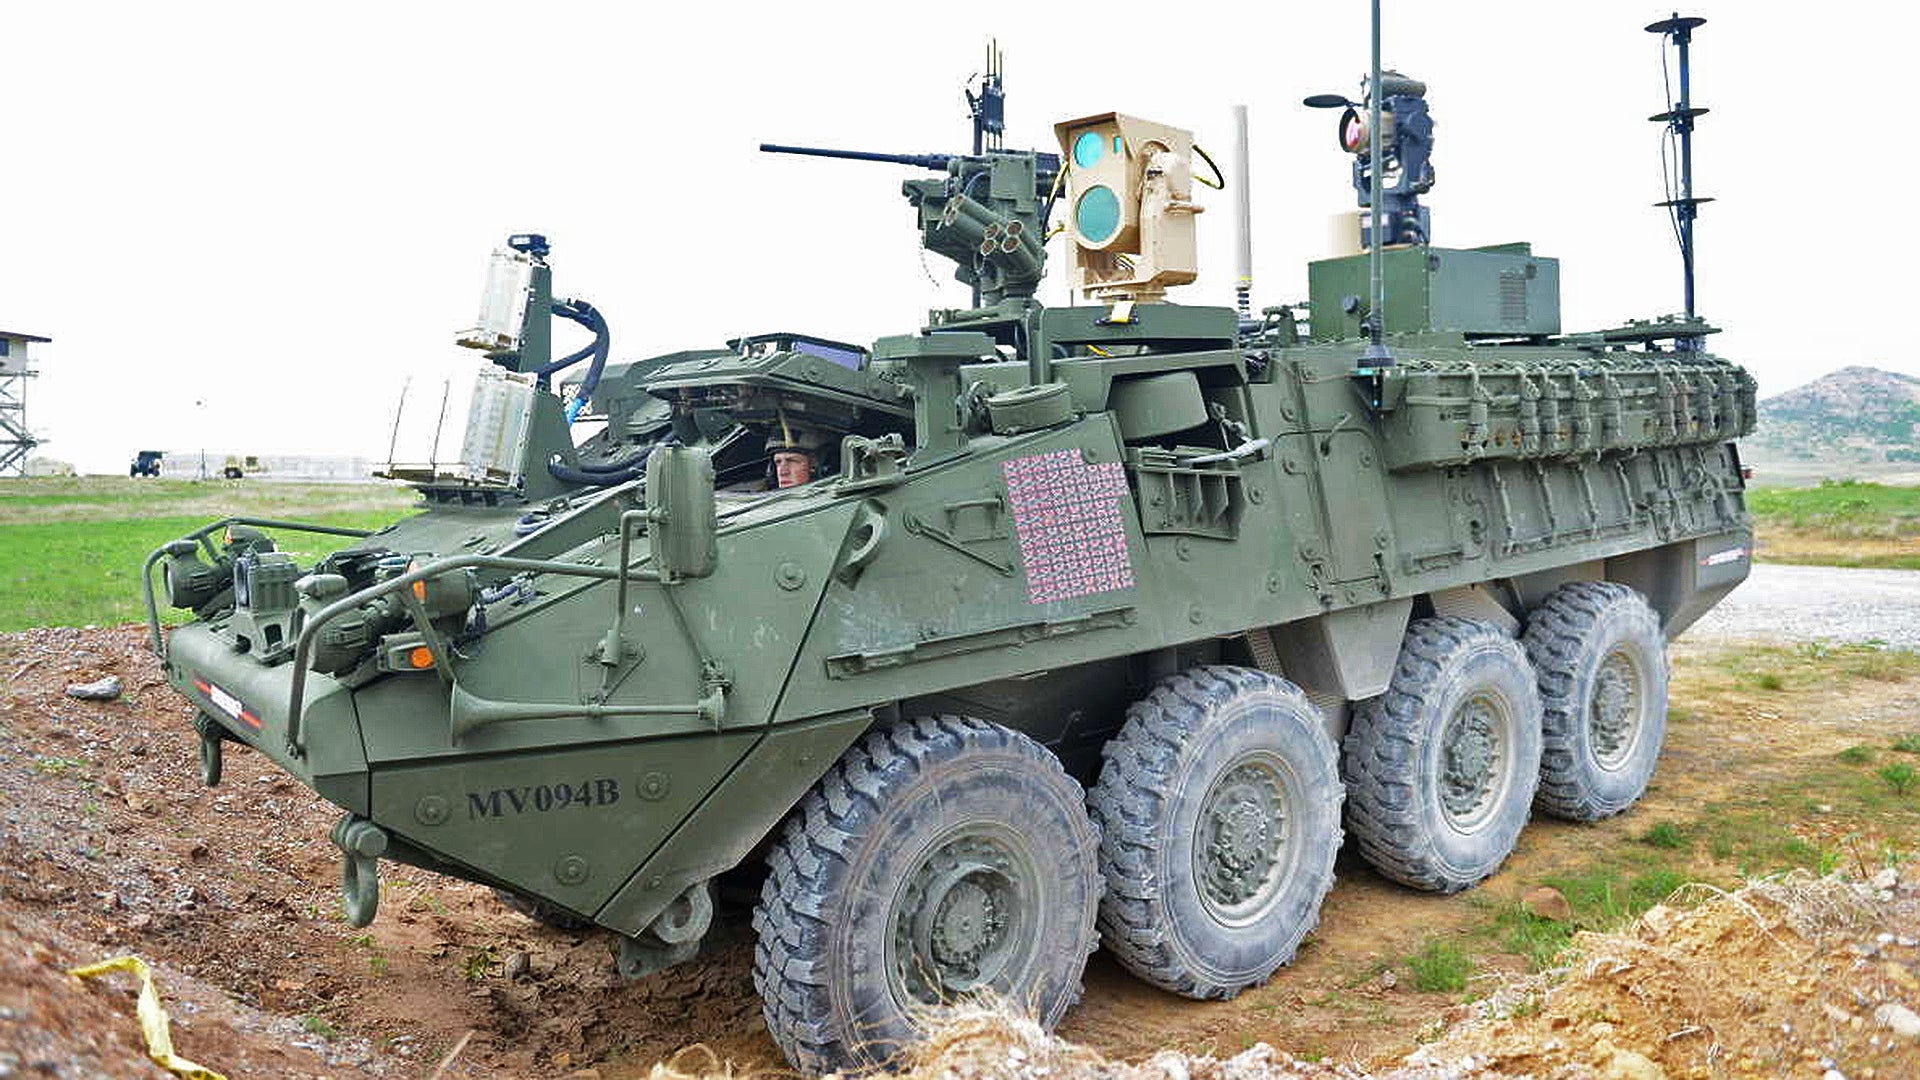 The U.S. Army’s Laser-Armed Stryker Has Blasted Dozens of Drones